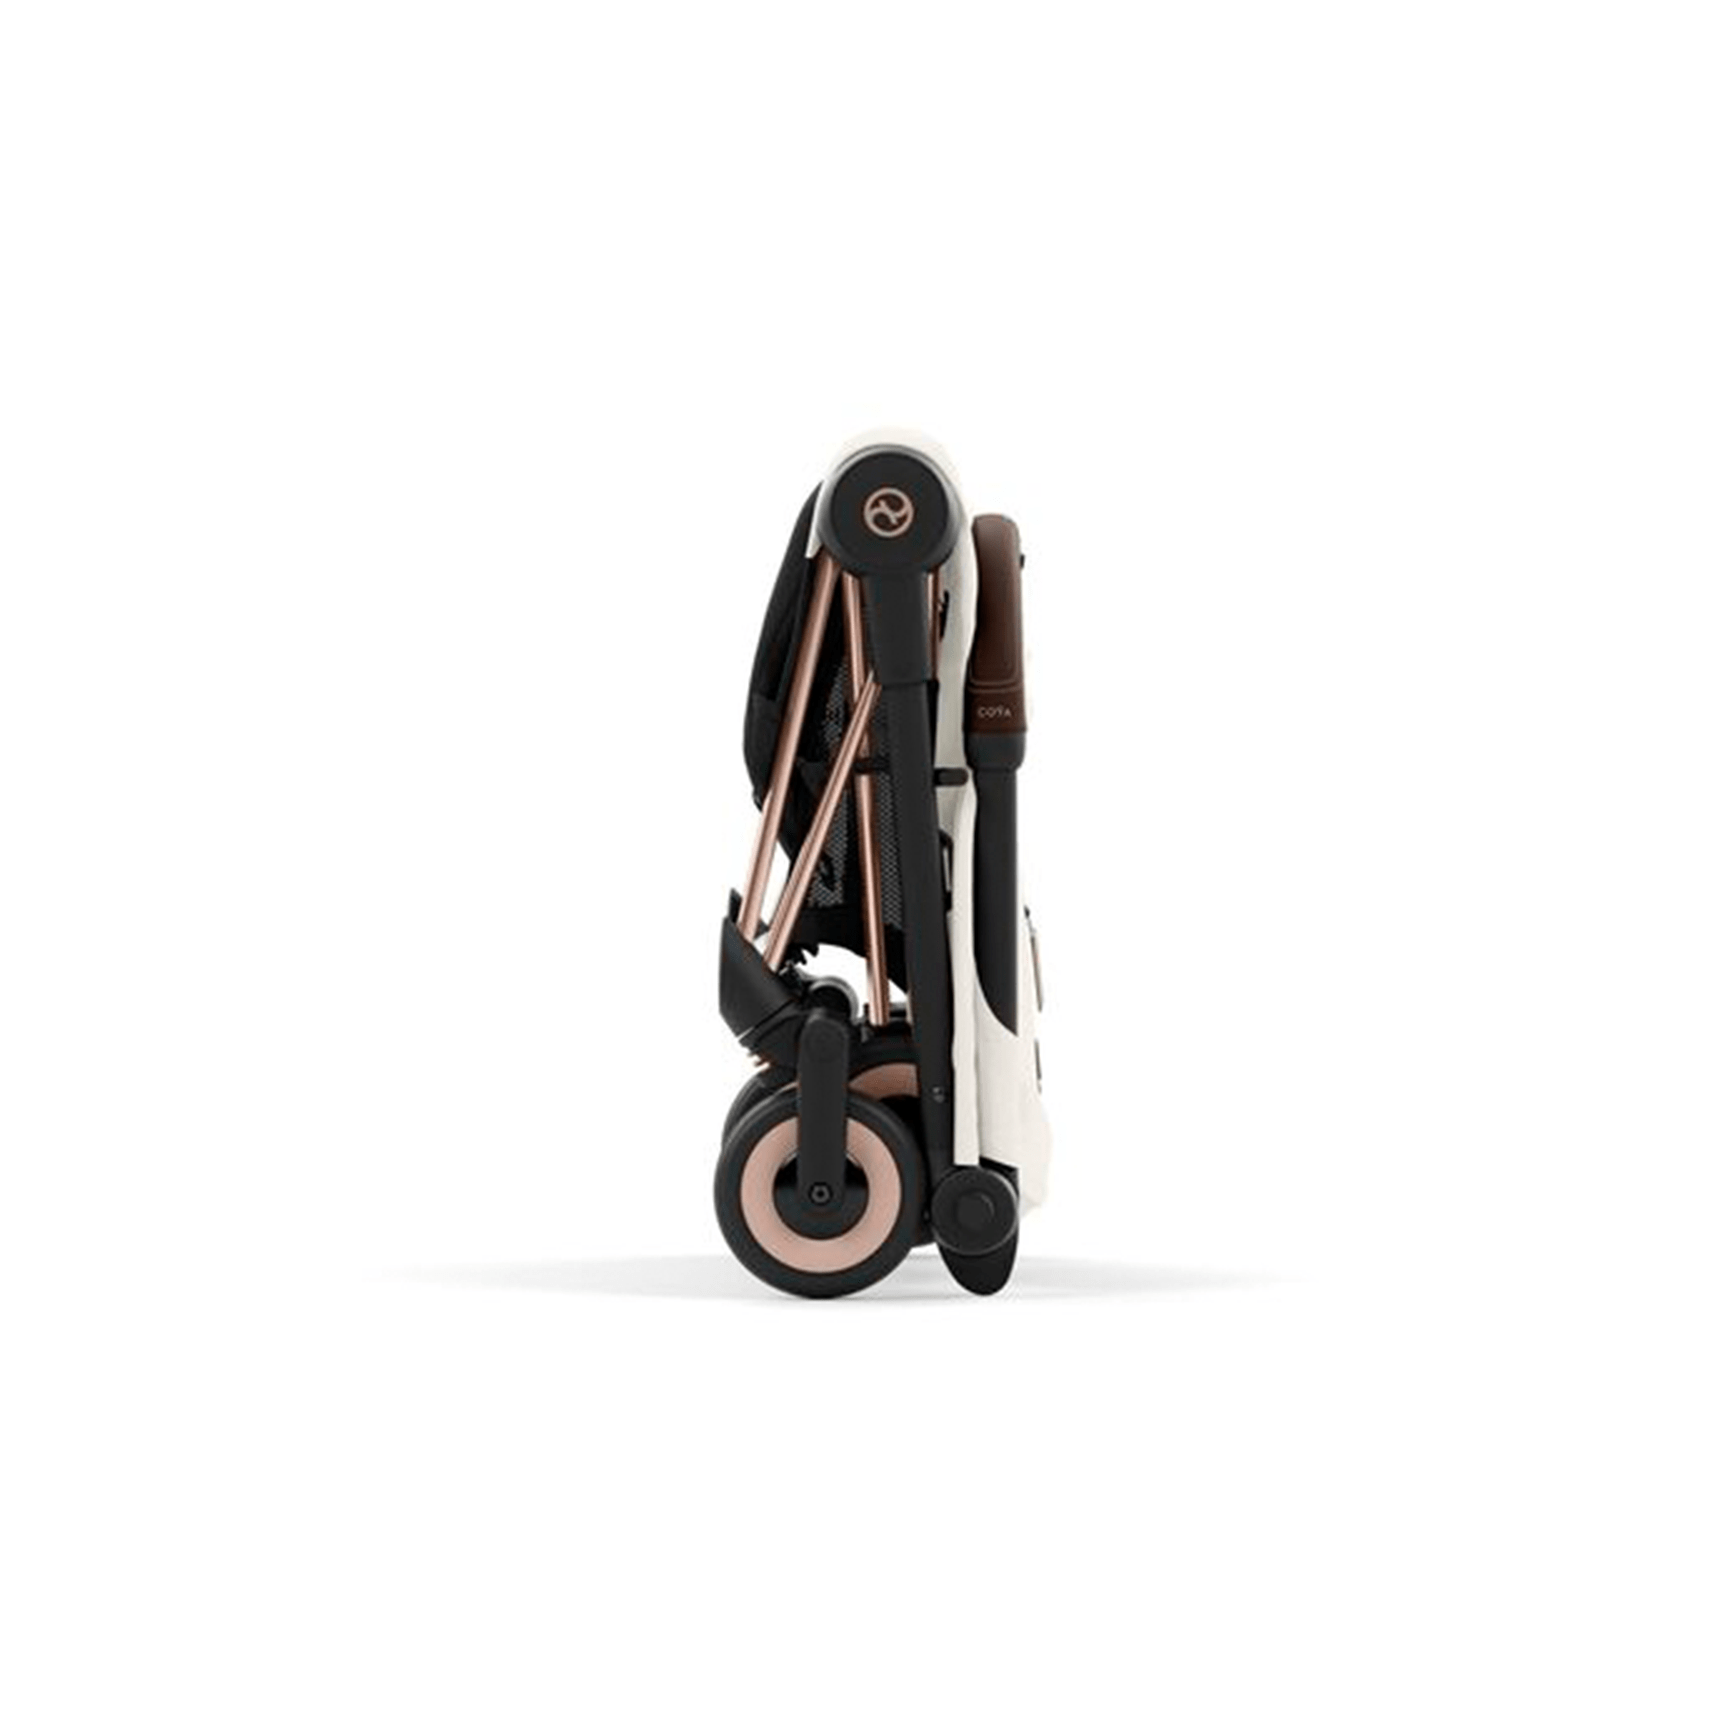 Cybex Pushchairs & Buggies Cybex COYA - Rose Gold Off White 522004267